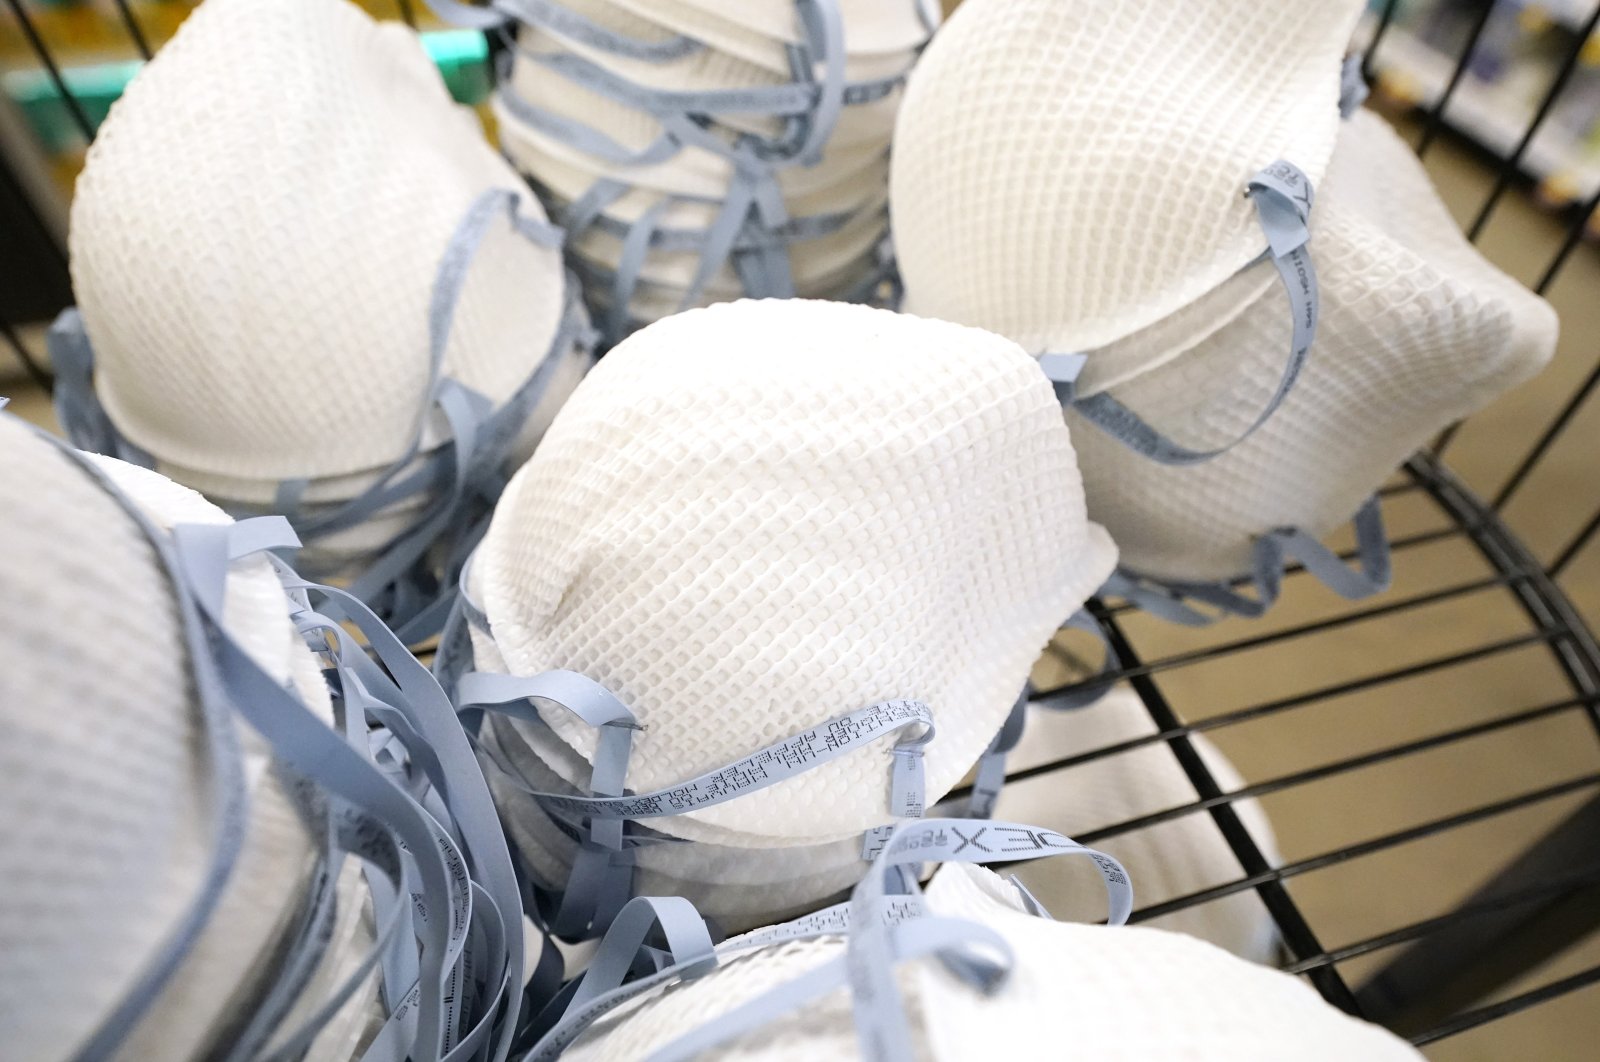 A product stall filled with free N95 respirator masks, provided by the U.S. Department of Health and Human Services, sits outside a pharmacy at a grocery store in Mississippi, U.S., Feb. 2, 2022. (AP Photo)